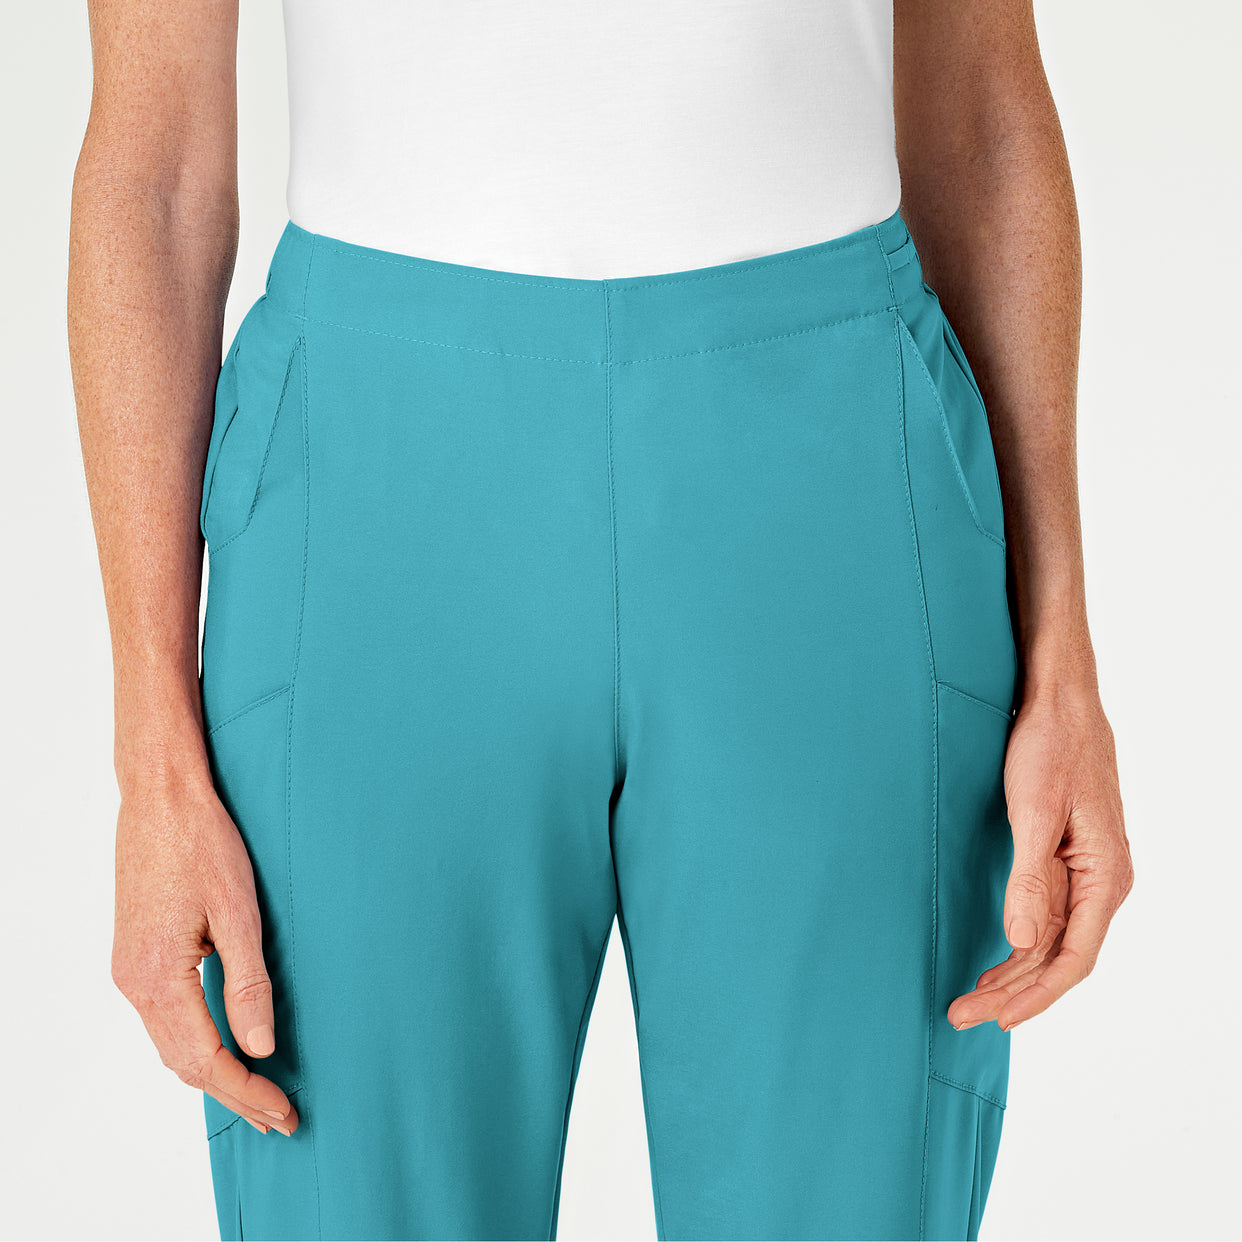 W123 Women's Flat Front Cargo Scrub Pant Teal Blue front detail